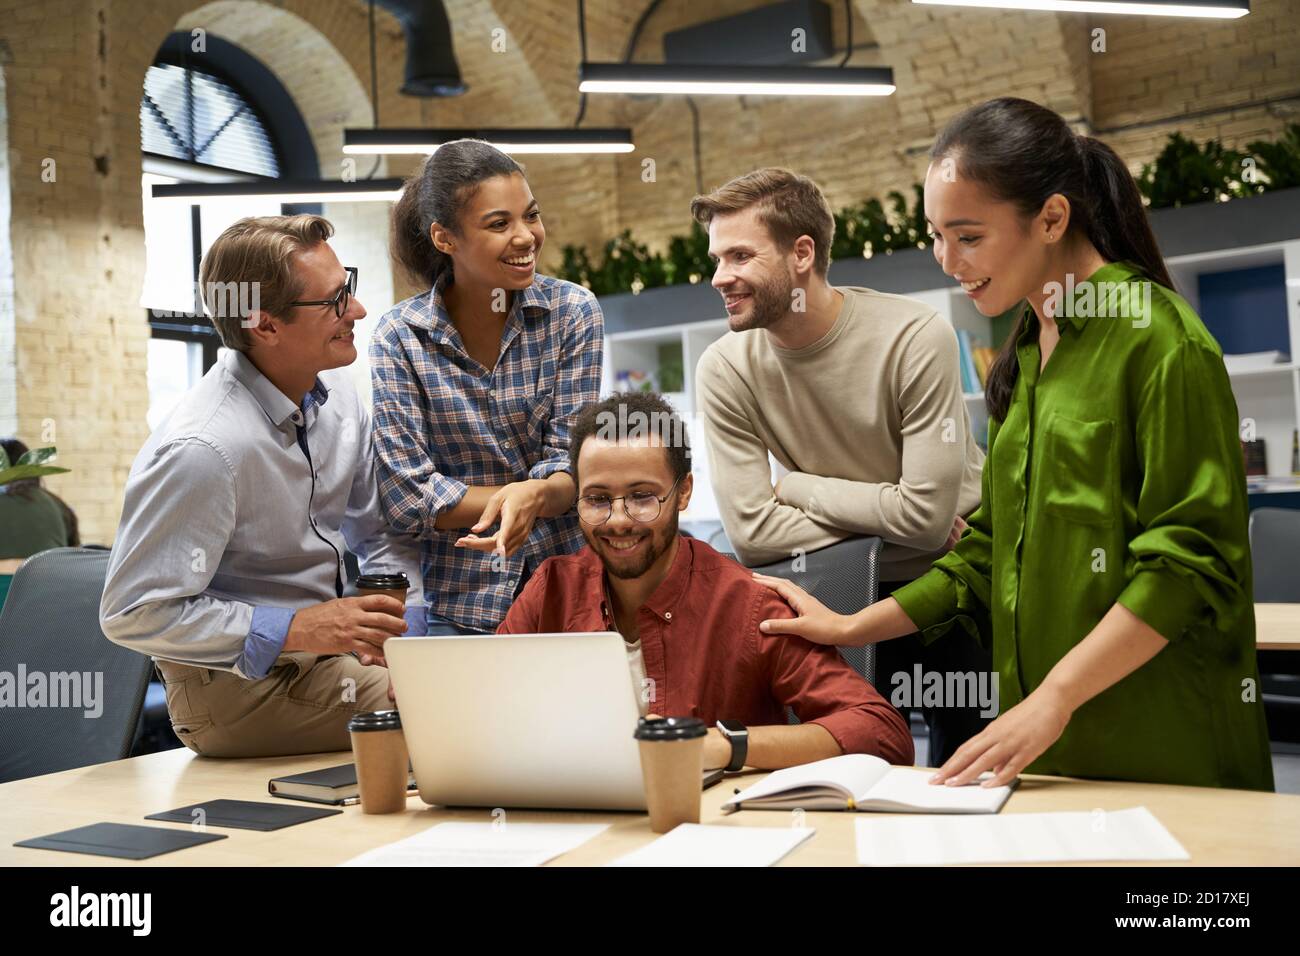 Sucssesful multiracial team analyzing project results. Group of young happy business people looking at laptop screen, communocating and discussing work while standing together in the modern office Stock Photo